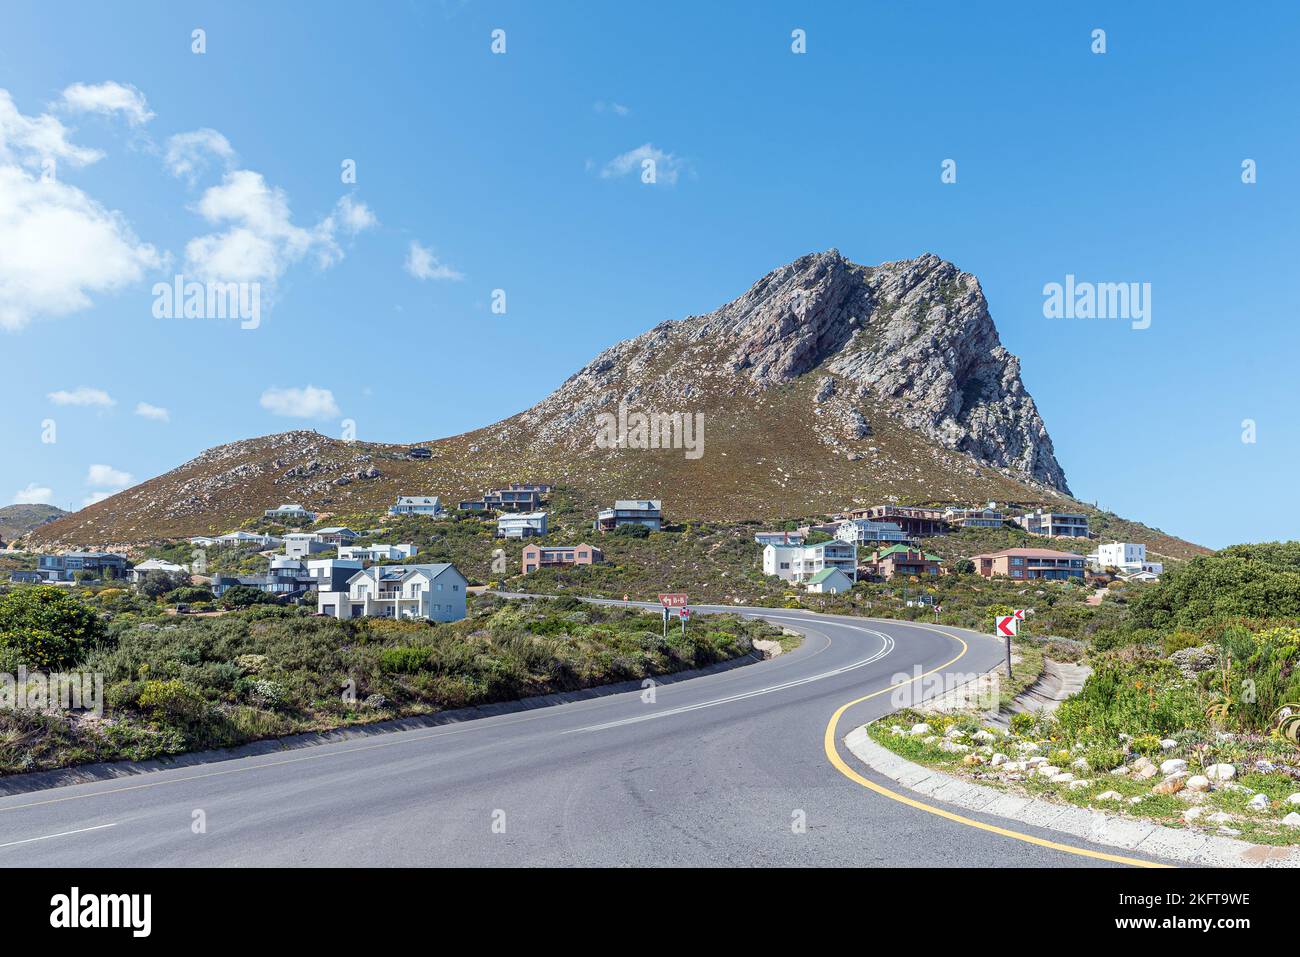 Rooiels, South Africa - Sep 20, 2022: A view of Rooiels on road R44 on the Western Cape South Coast. Houses are visible Stock Photo